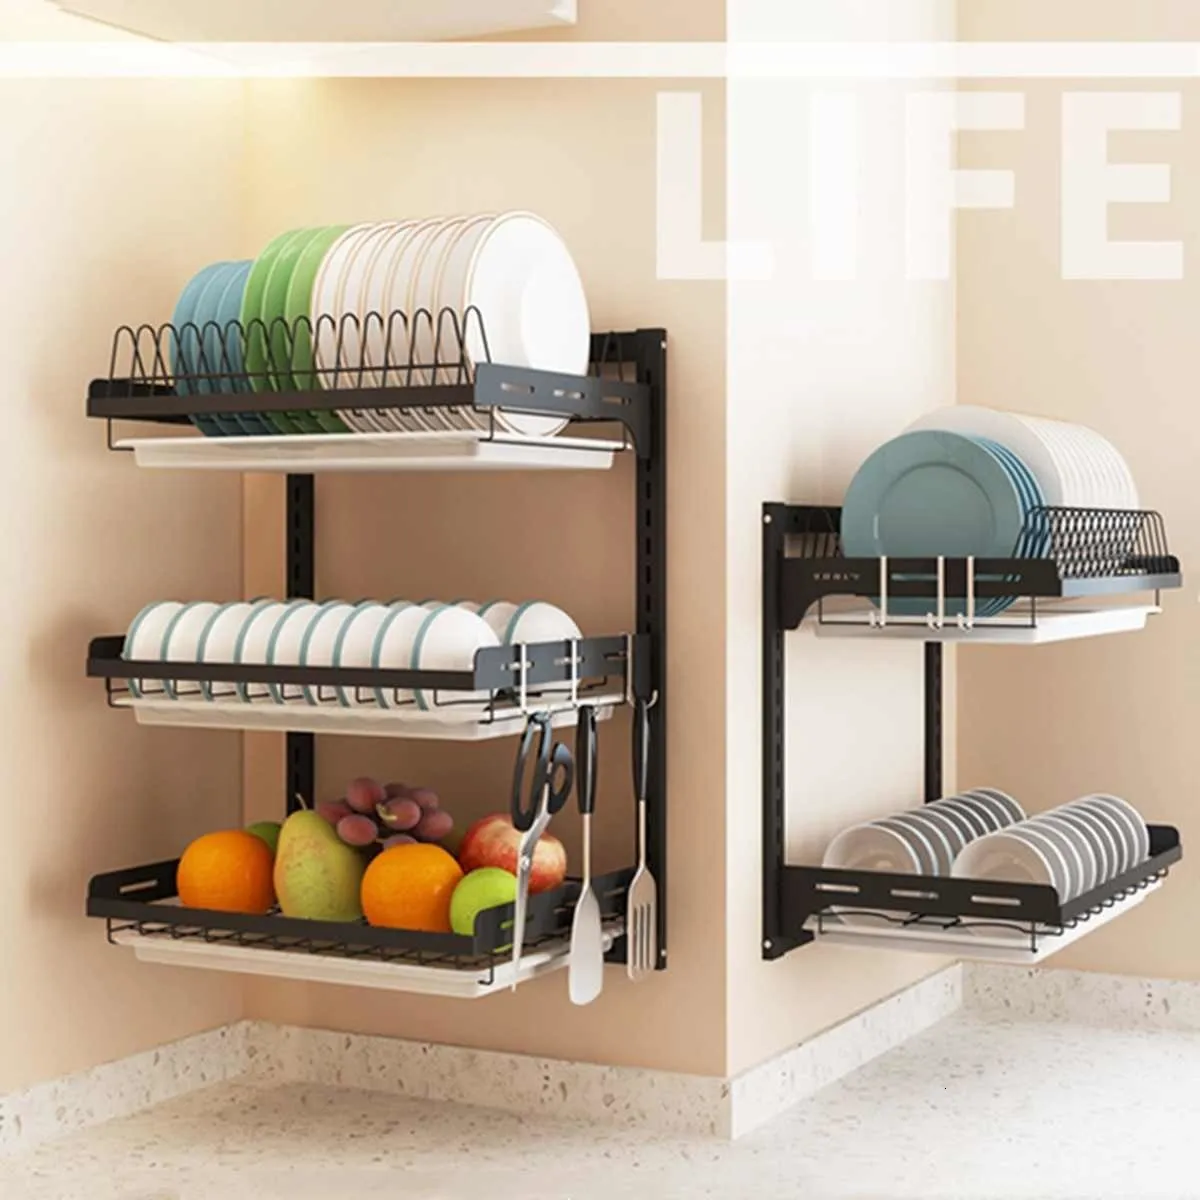 Wall Mount 304 Stainless Steel Kitchen Dish Rack With Cutlery Cup, Kitchen Dish  Drainer Rack, And Drying Rack Organize Your Kitchen With Ease T2003210G  From Ai810, $106.88